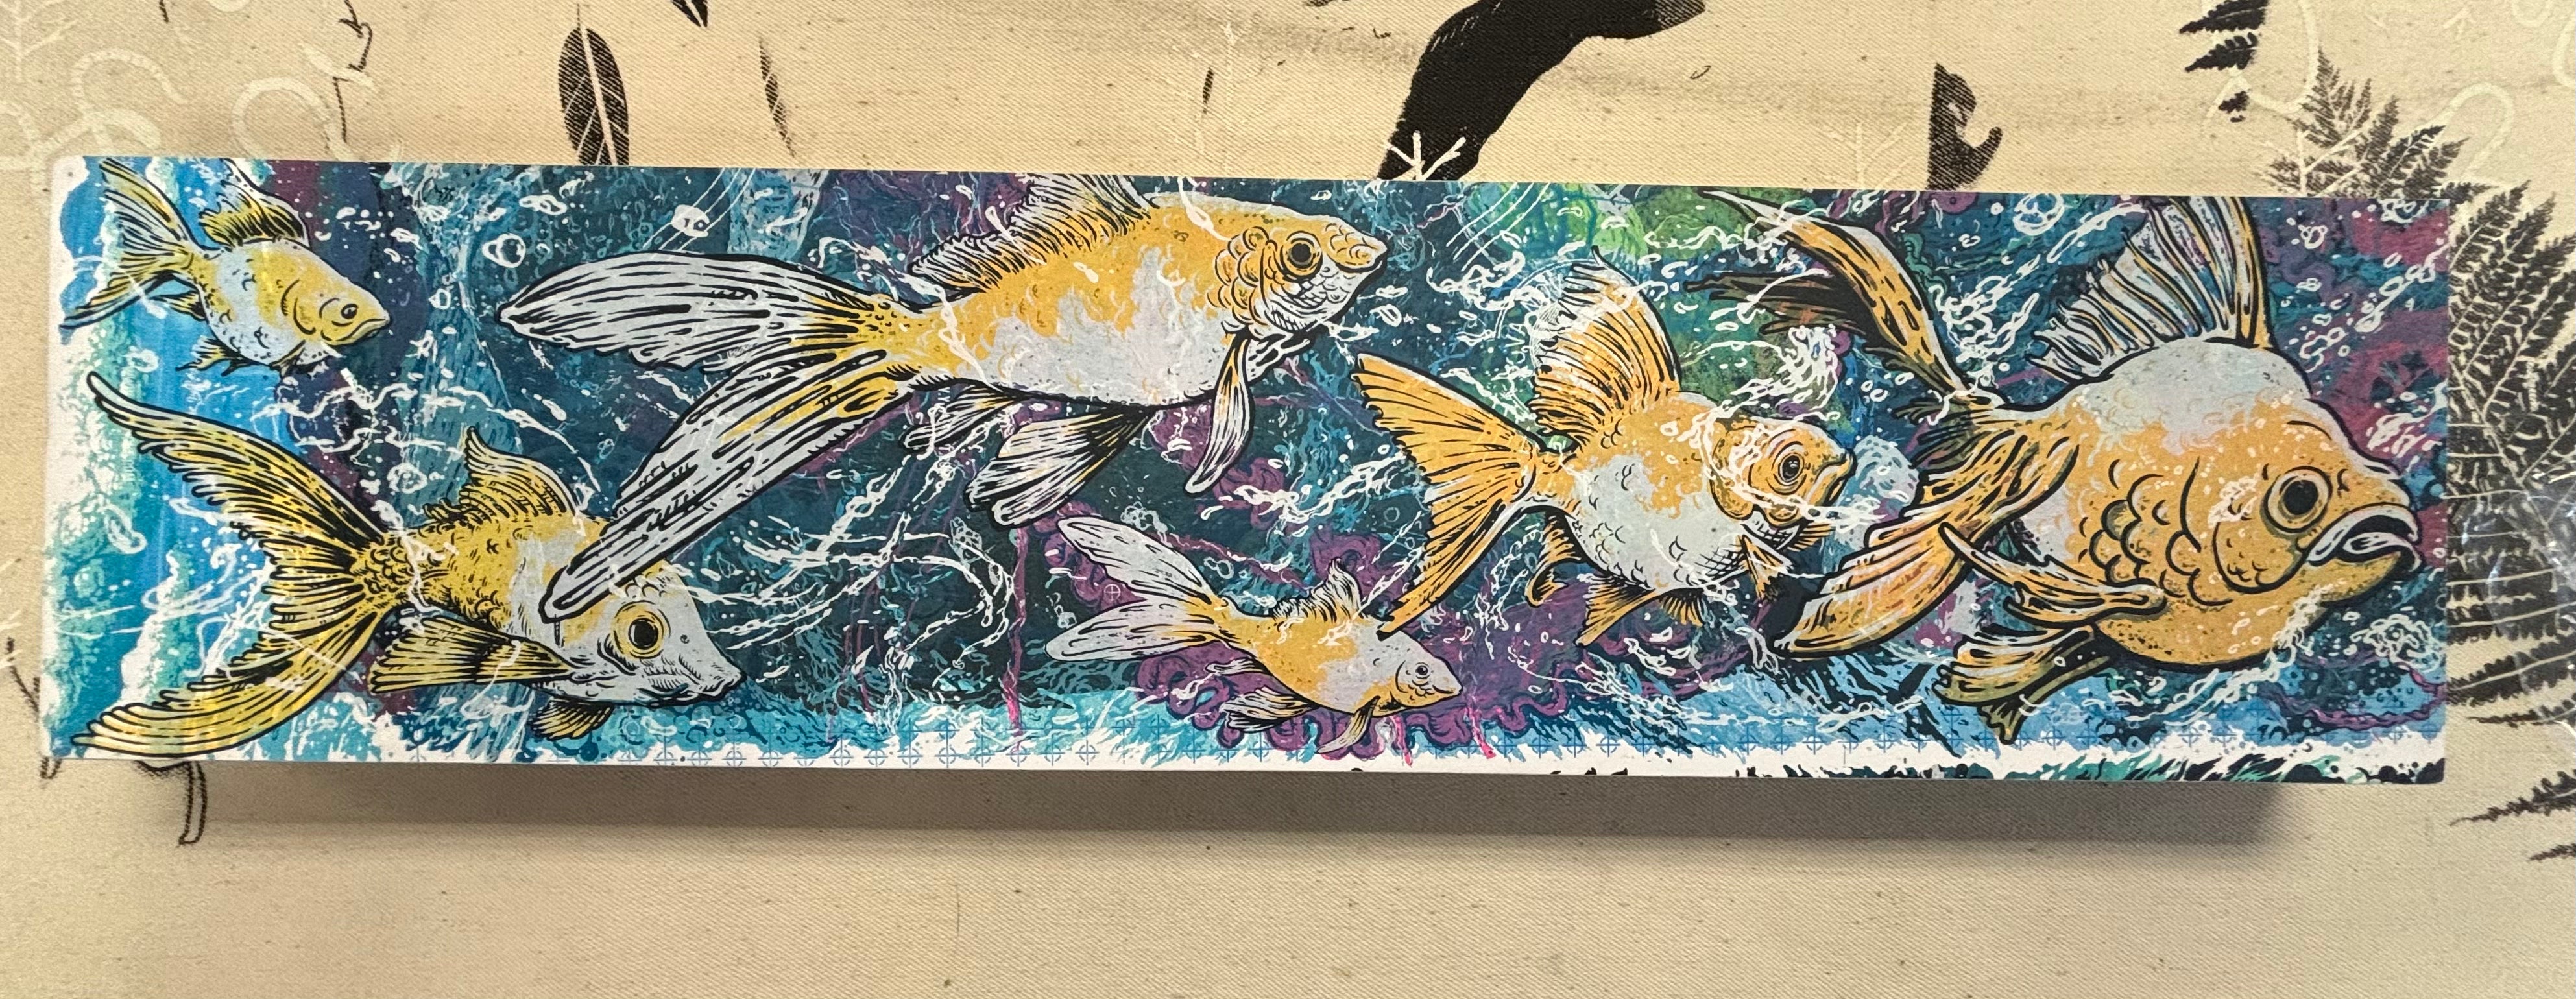 Auction Week 5 Delicious Goldfishes- Mixed Media Monoprint on Panel